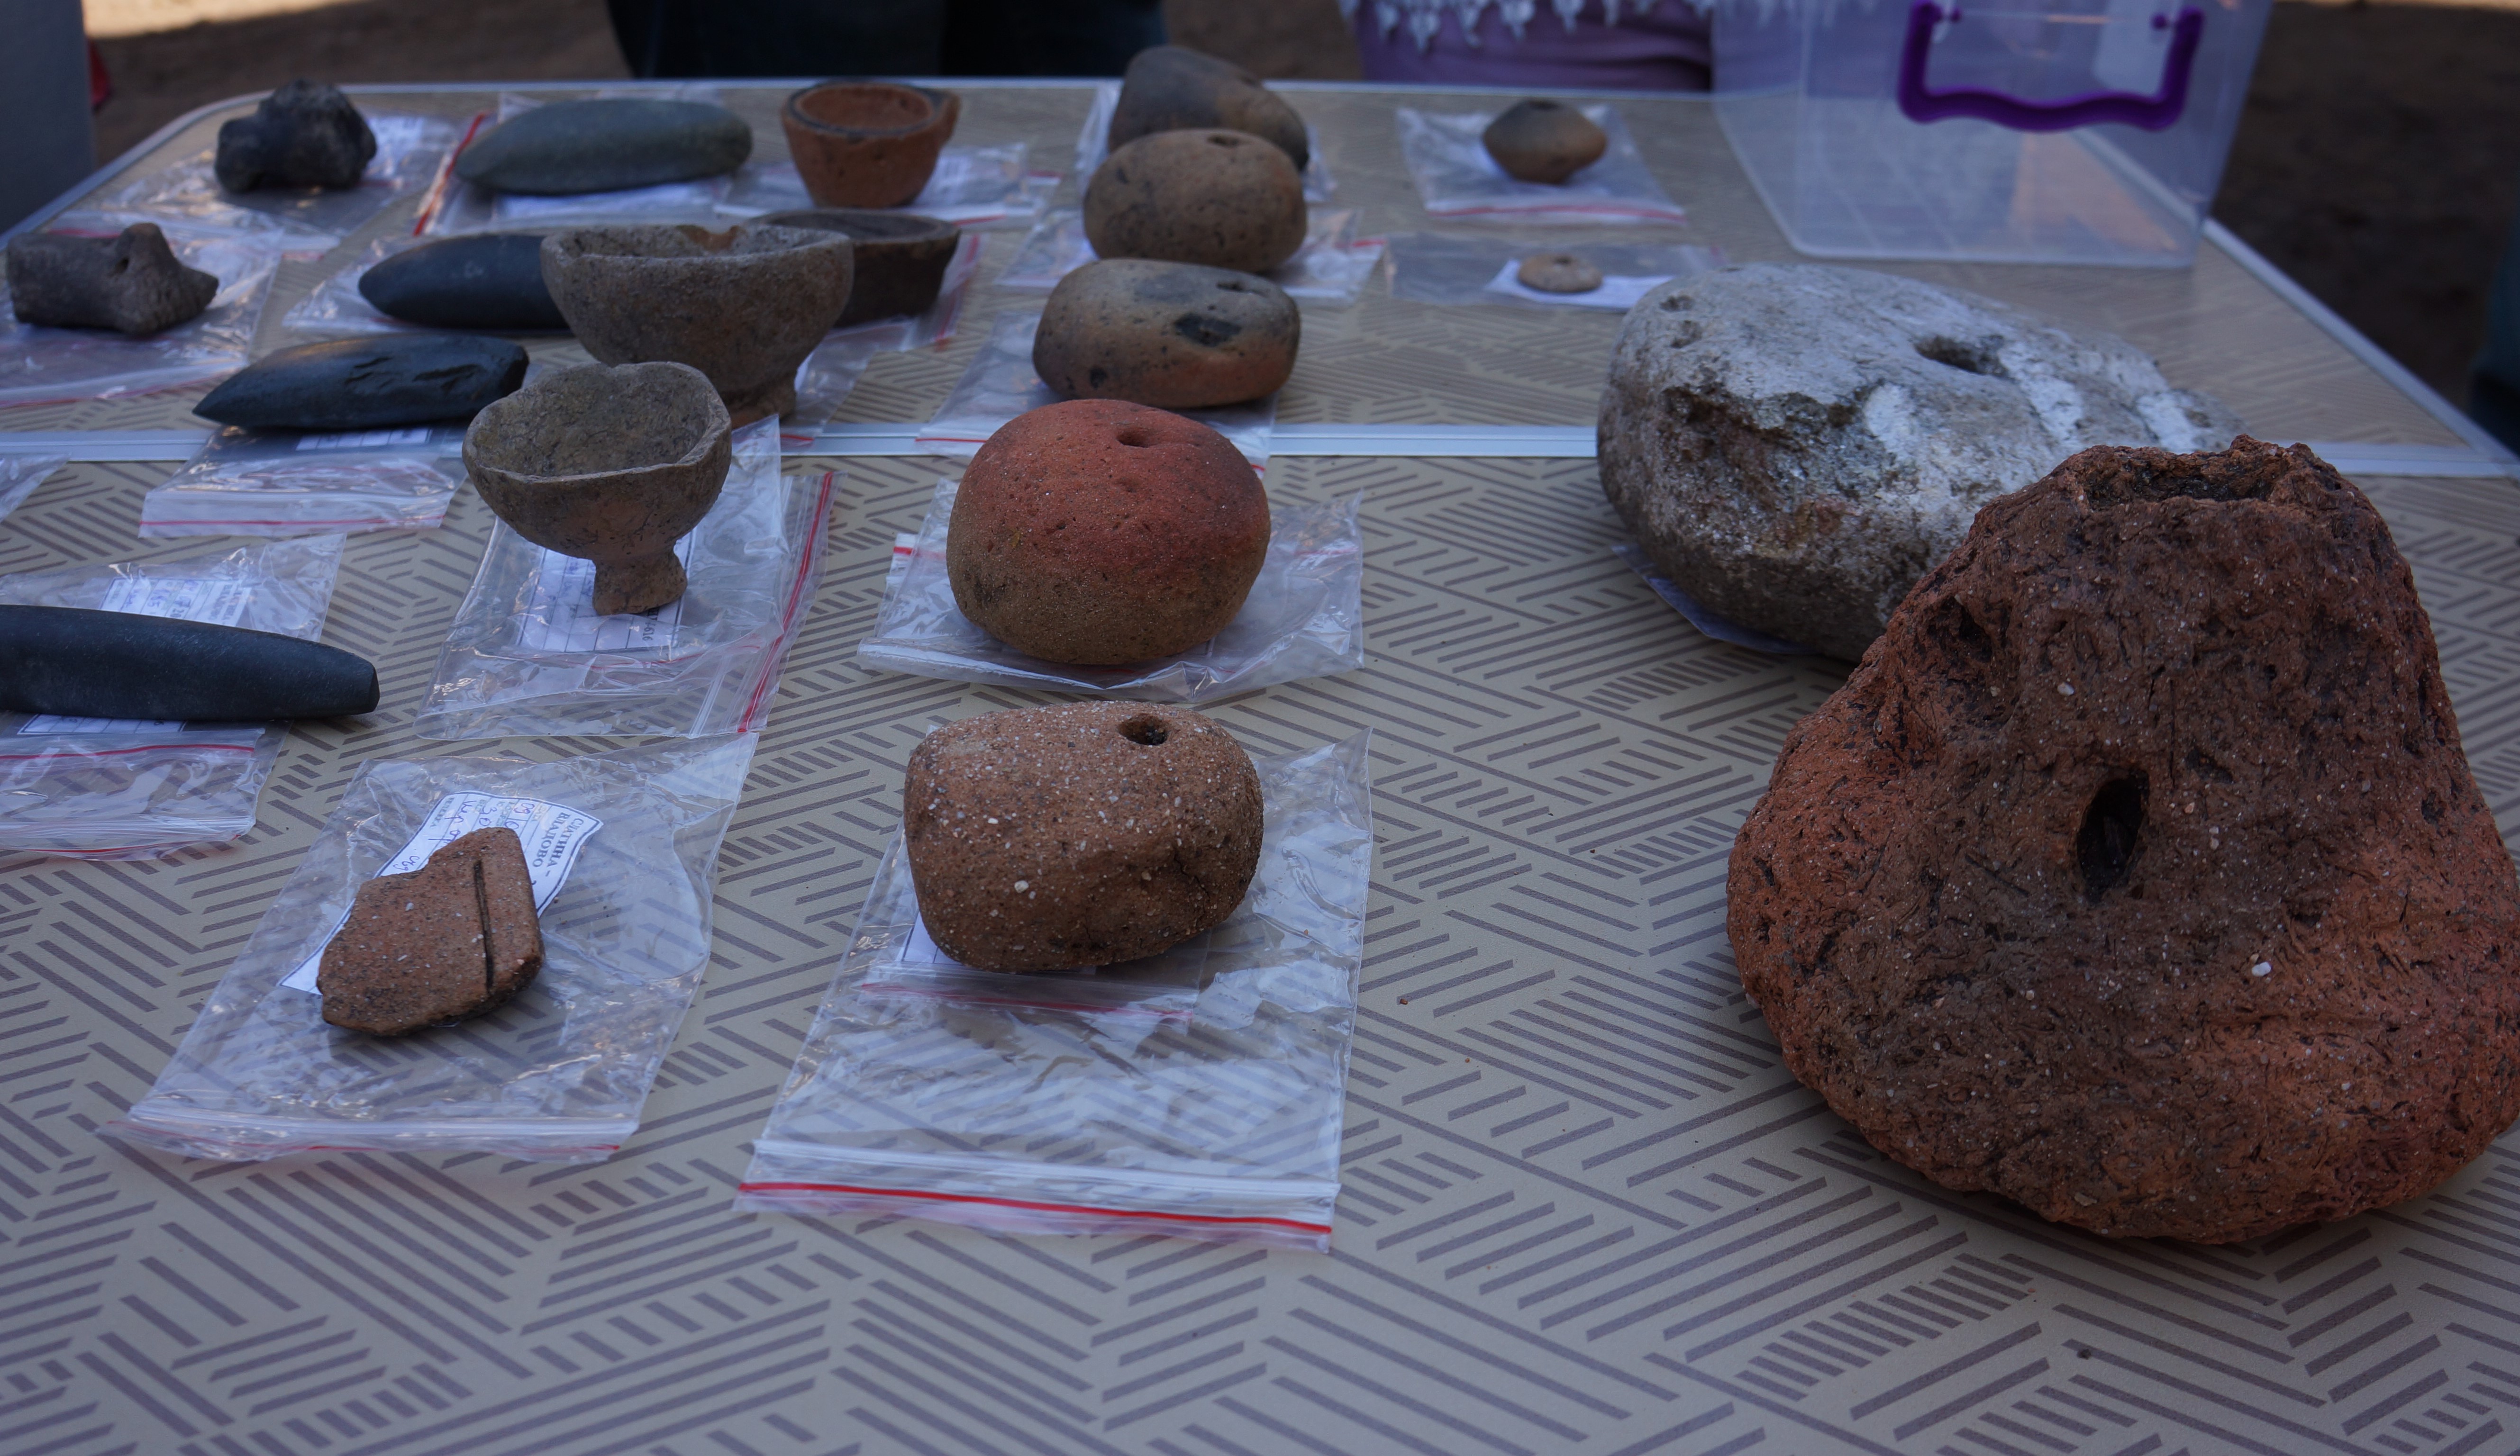 8,000-year-old graves found in Sofia – The History Blog